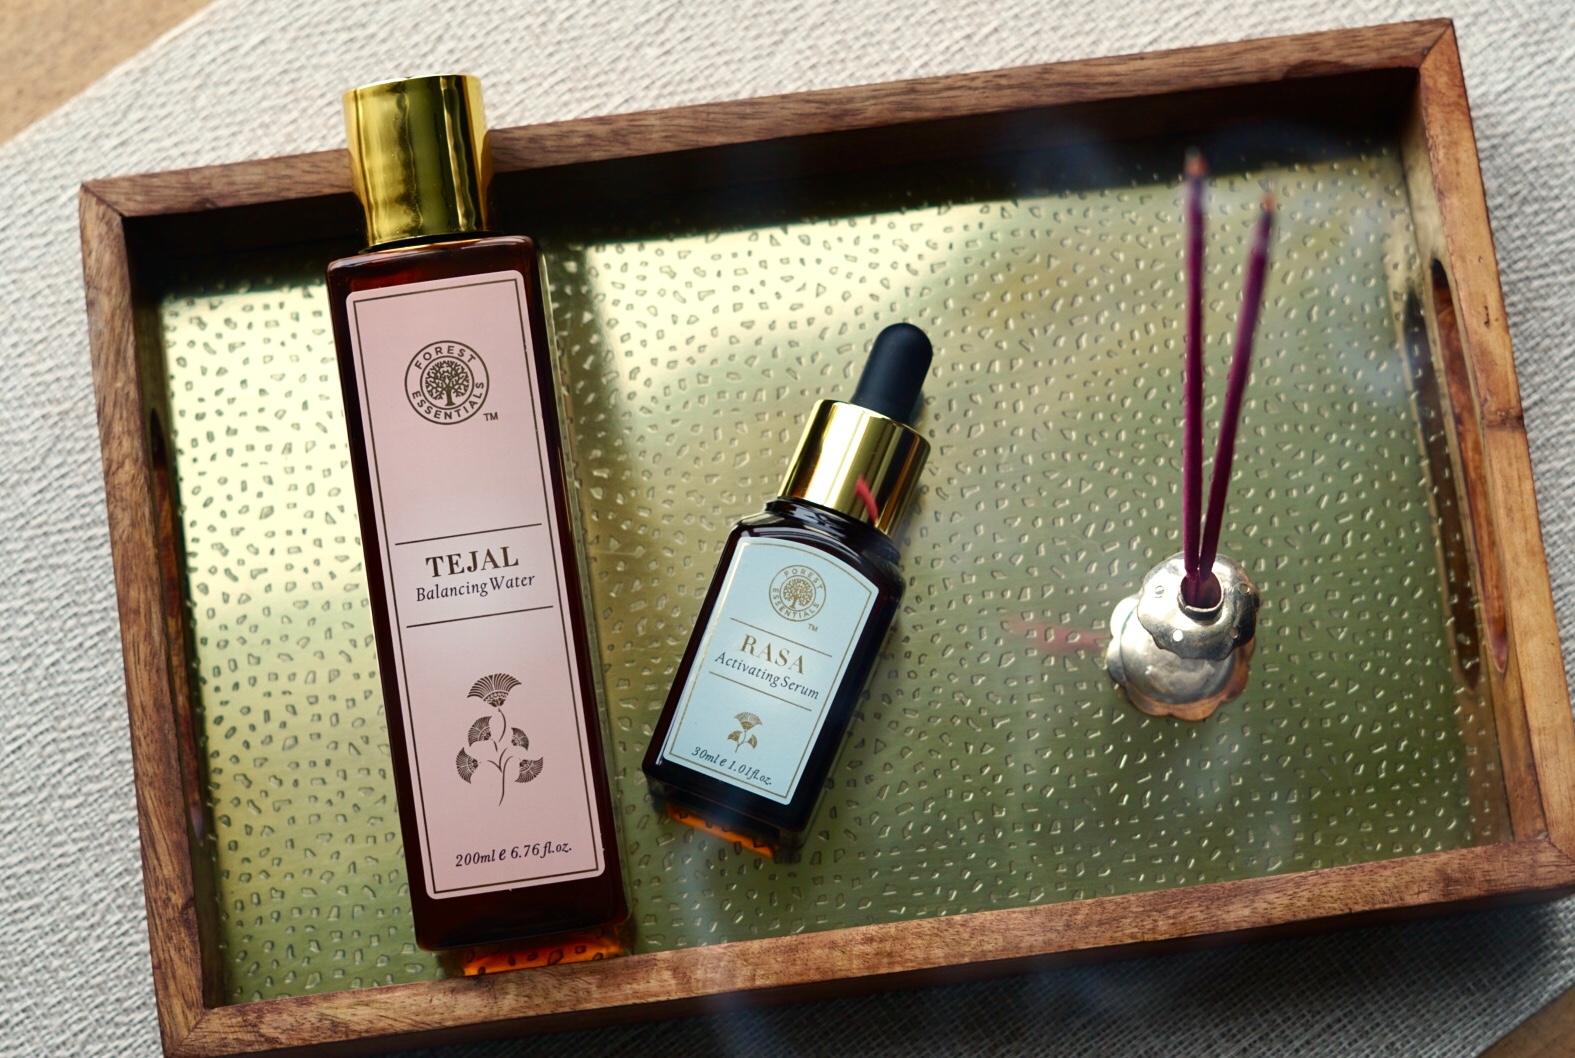 Forest Essentials Rasa Activating Serum and Tejal Balancing Water